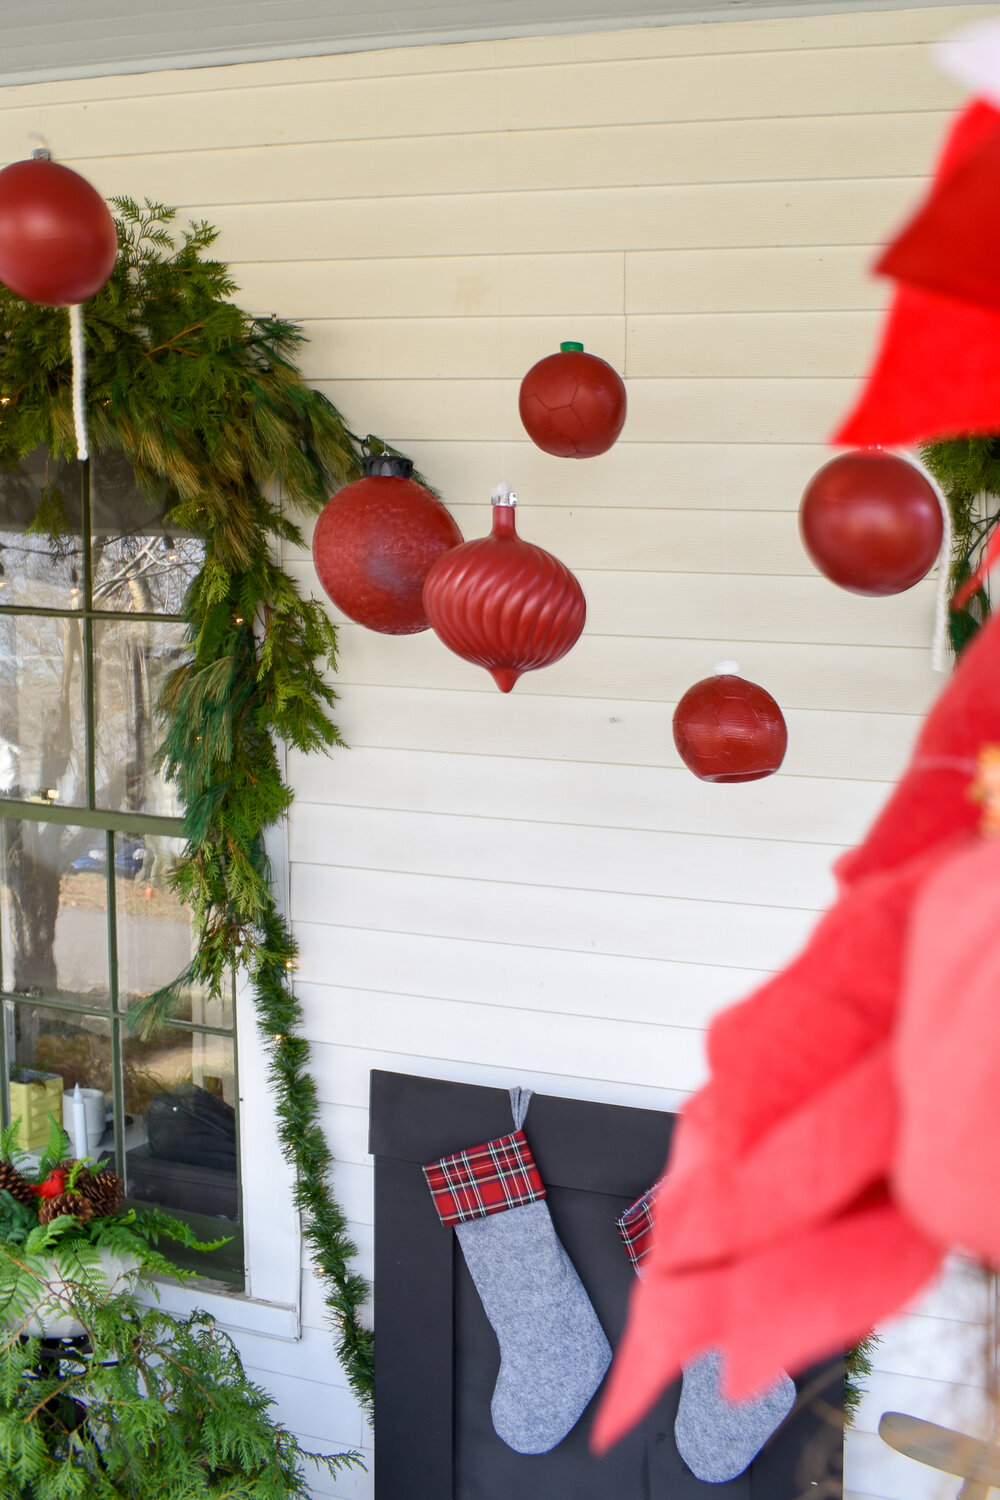 Christmas Porch Decorations: Oversized Ornament Diy (From Trash!) — T.  Moore Home Interior Design Studio